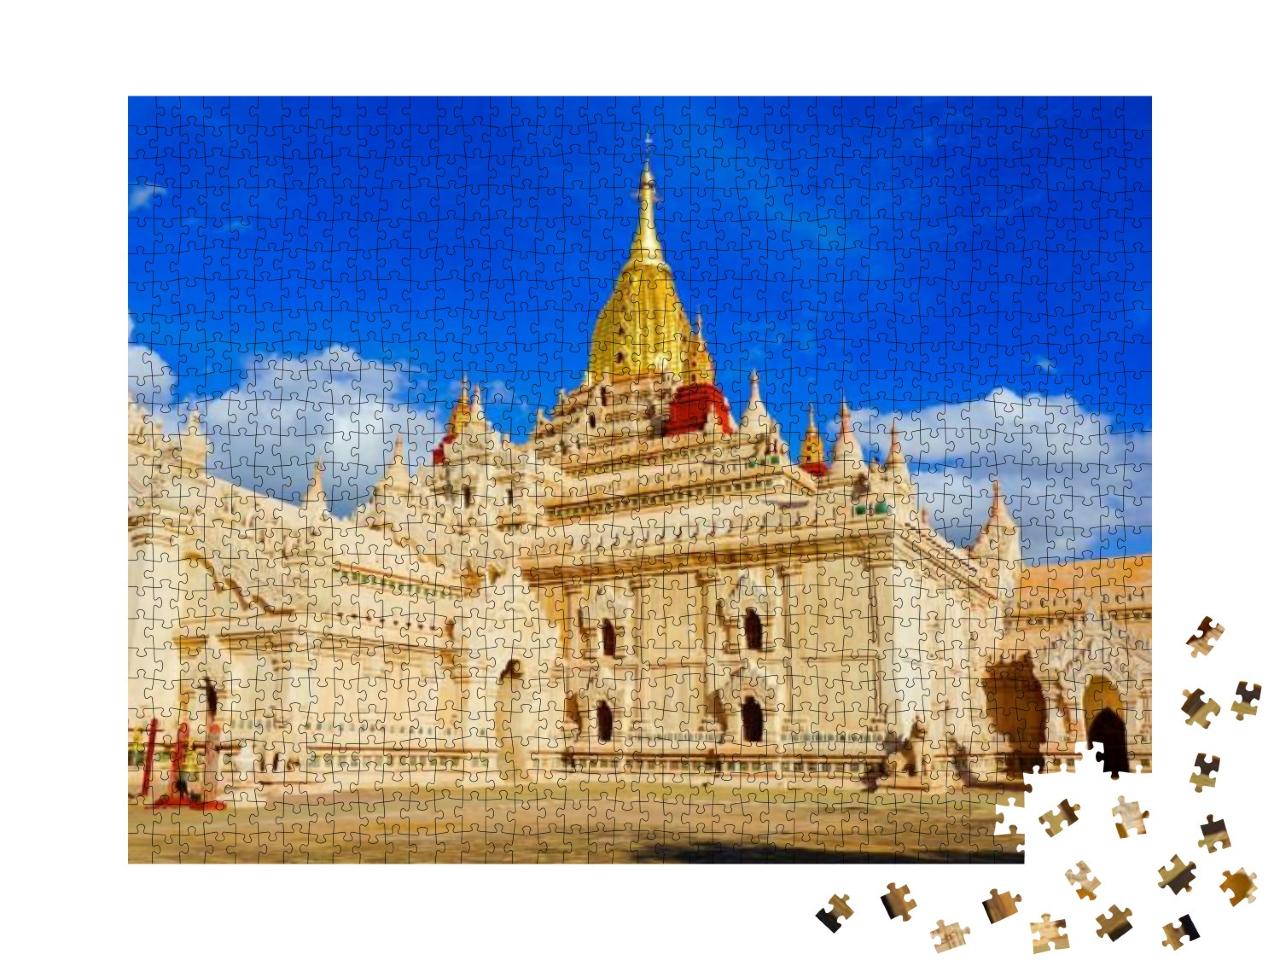 The Ananda Temple in Bagan, Myanmar... Jigsaw Puzzle with 1000 pieces